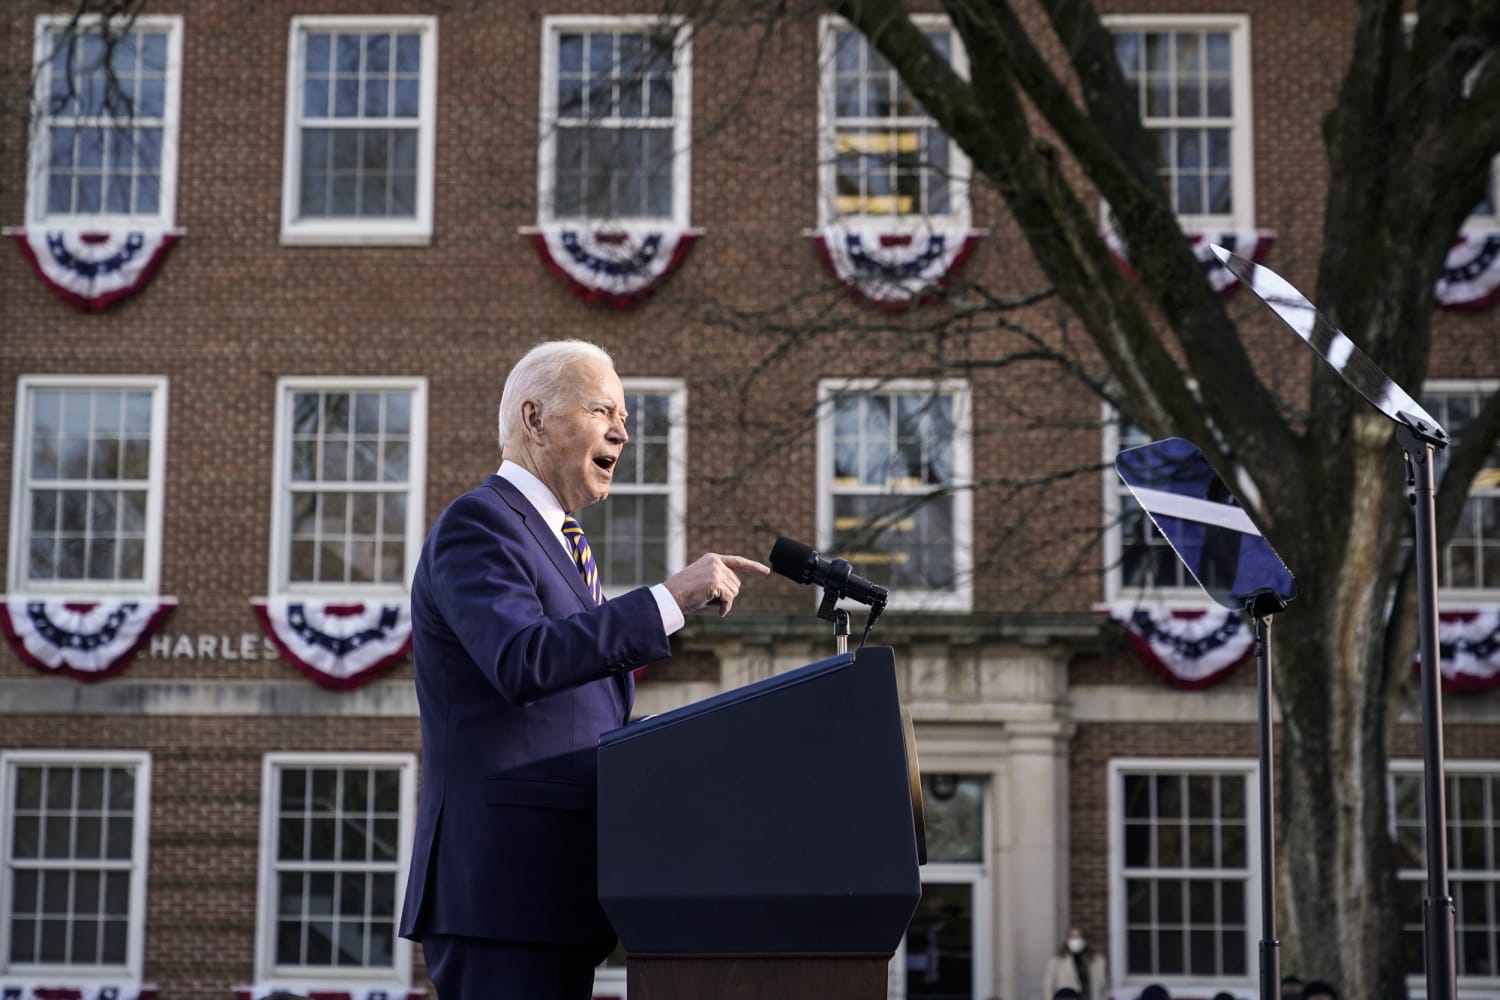 Humiliating Biden at his voting rights speech is not a winning Democratic strategy